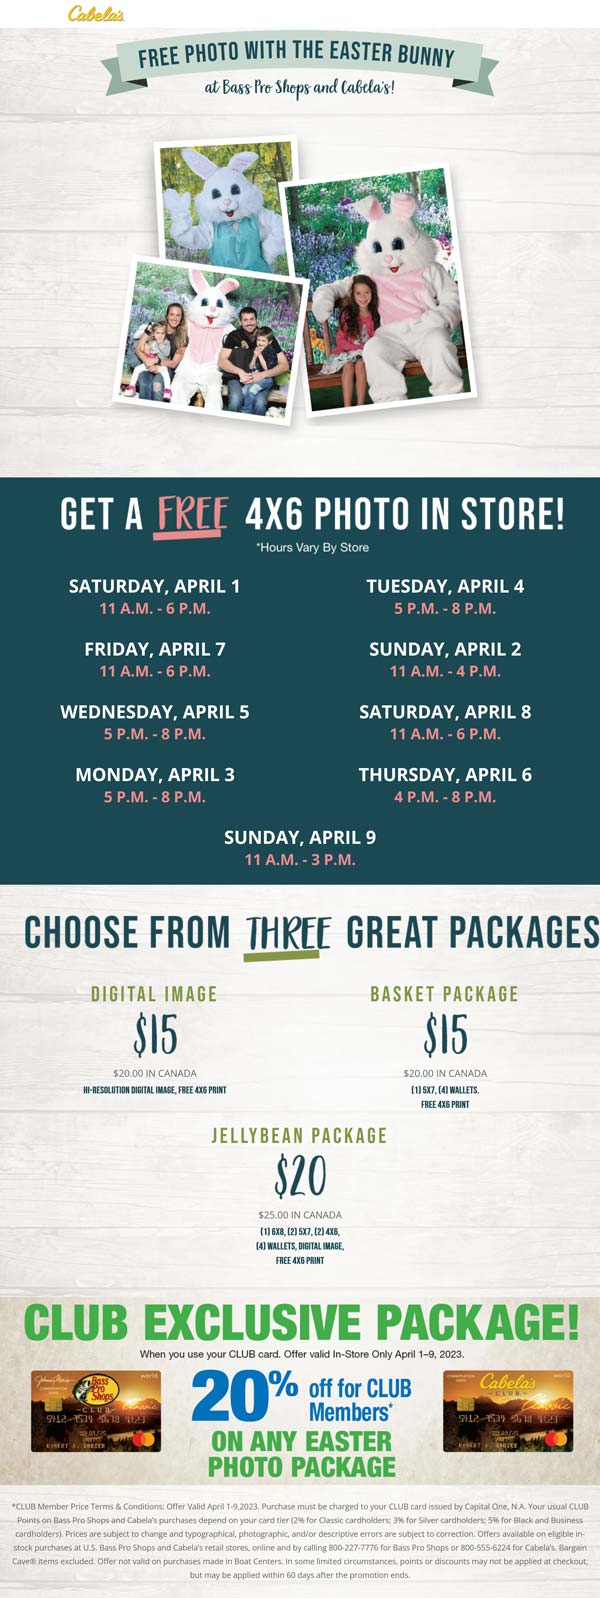 Cabelas stores Coupon  Free photo with Easter bunny the 1st-9th at Cabelas #cabelas 